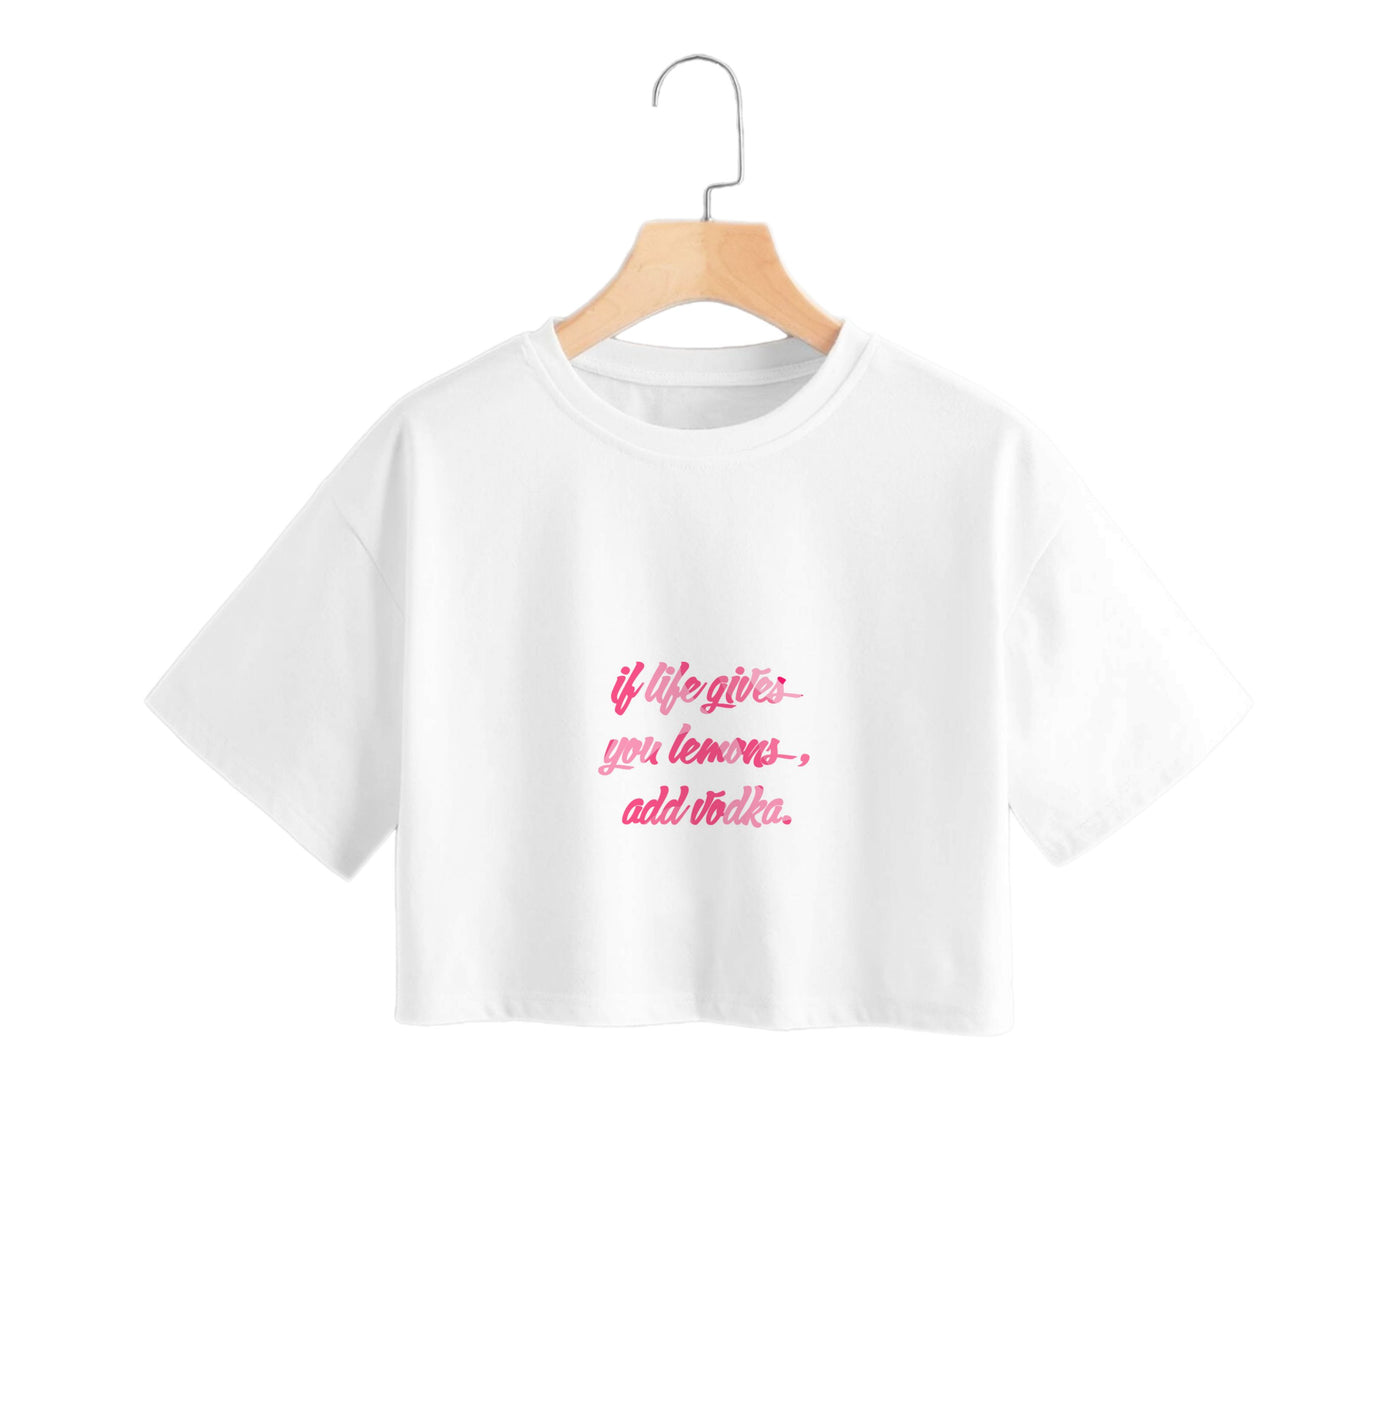 If Life Gives You Lemons, Add Vodka - Sassy Quotes Crop Top